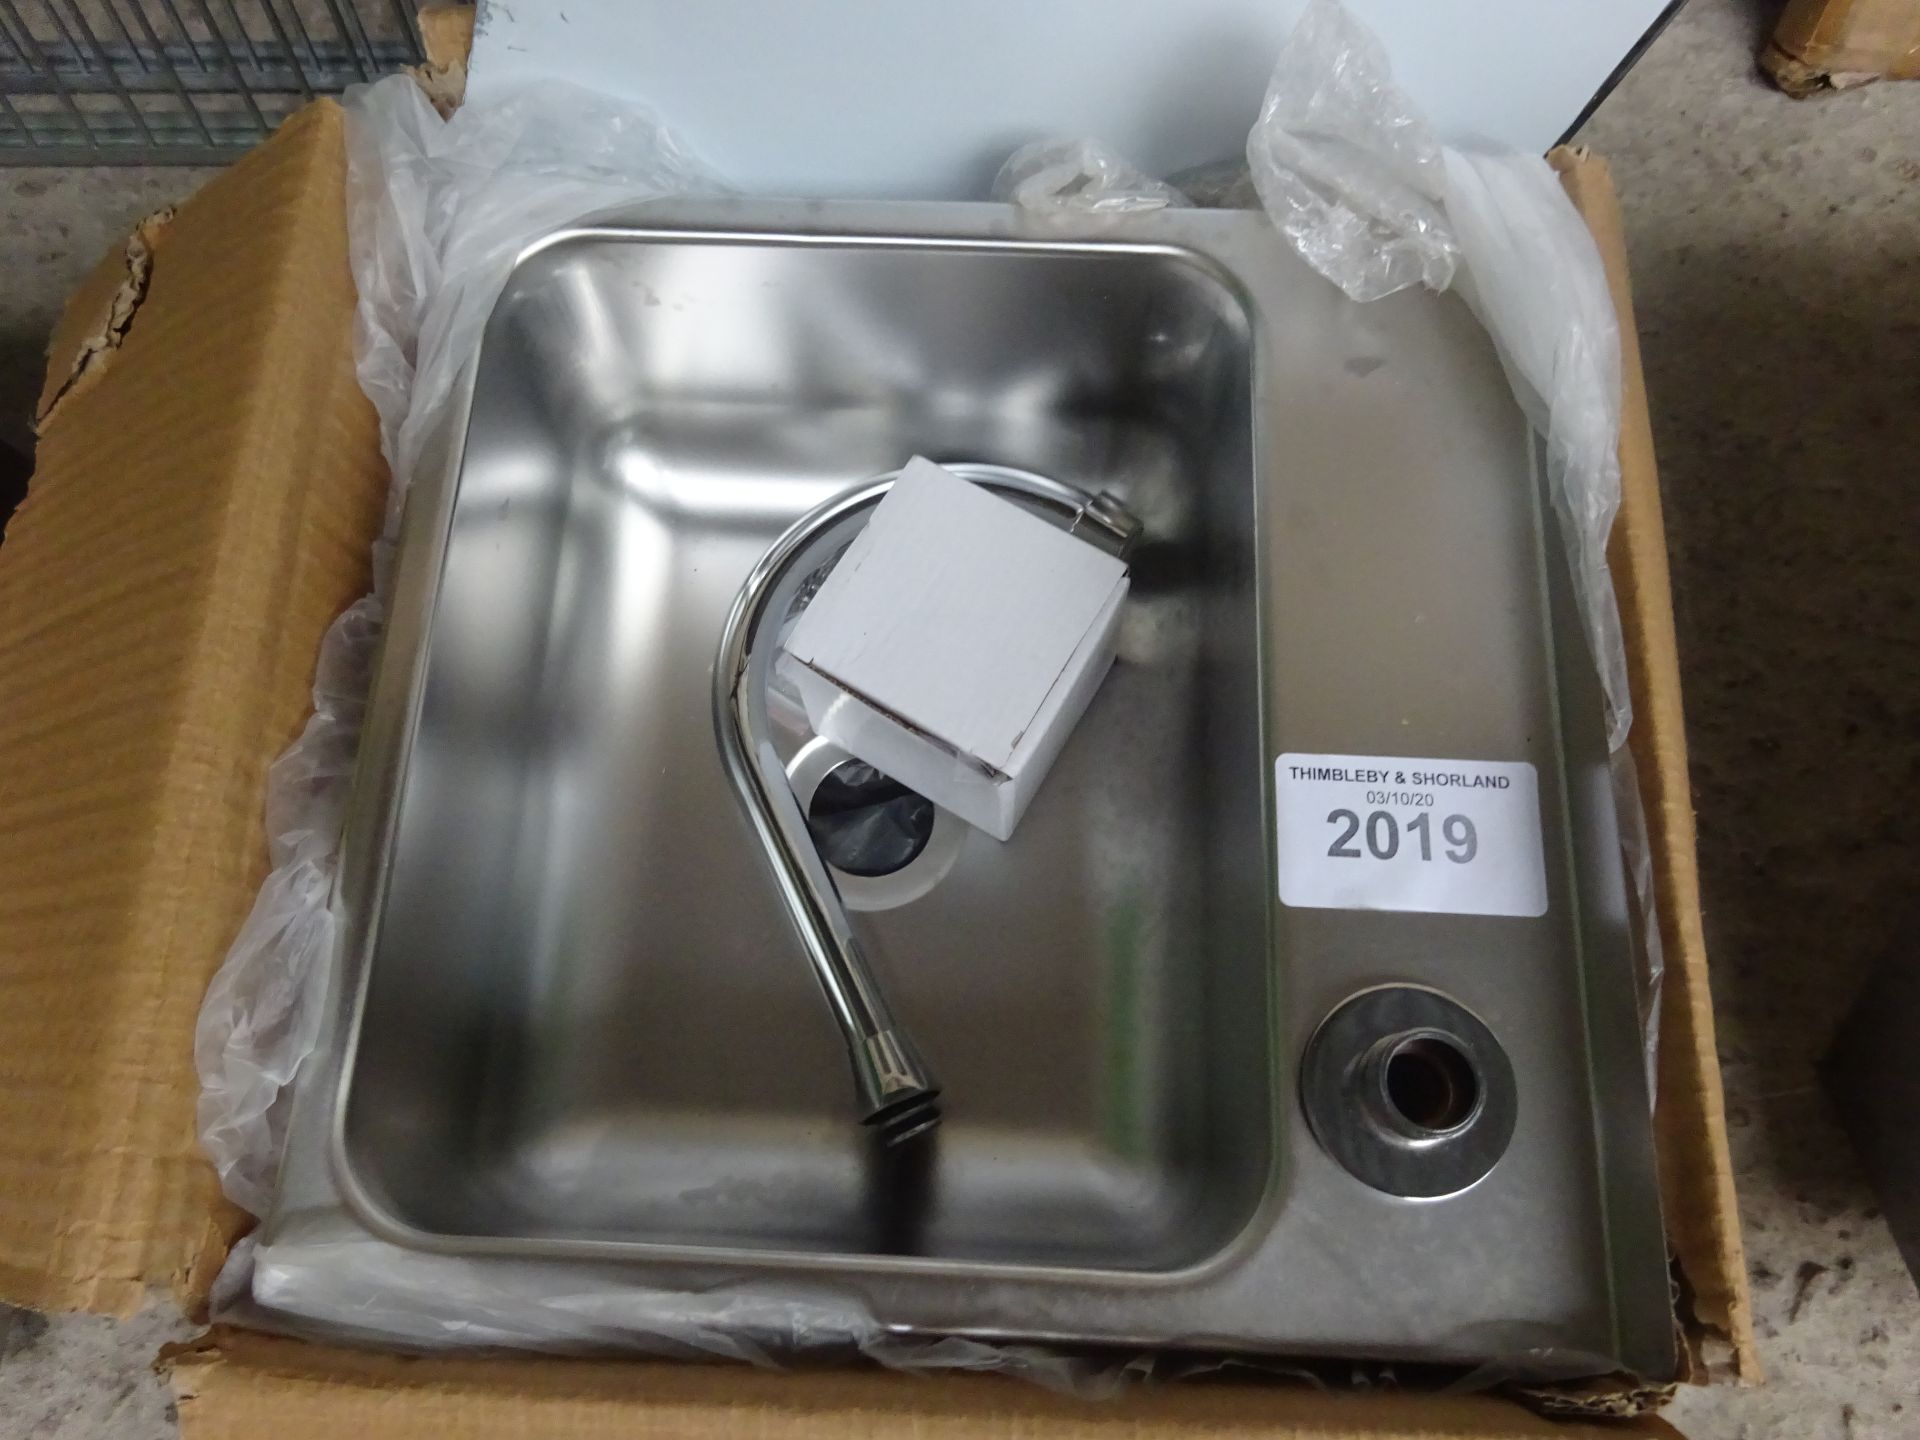 New stainless steel hand sink with taps